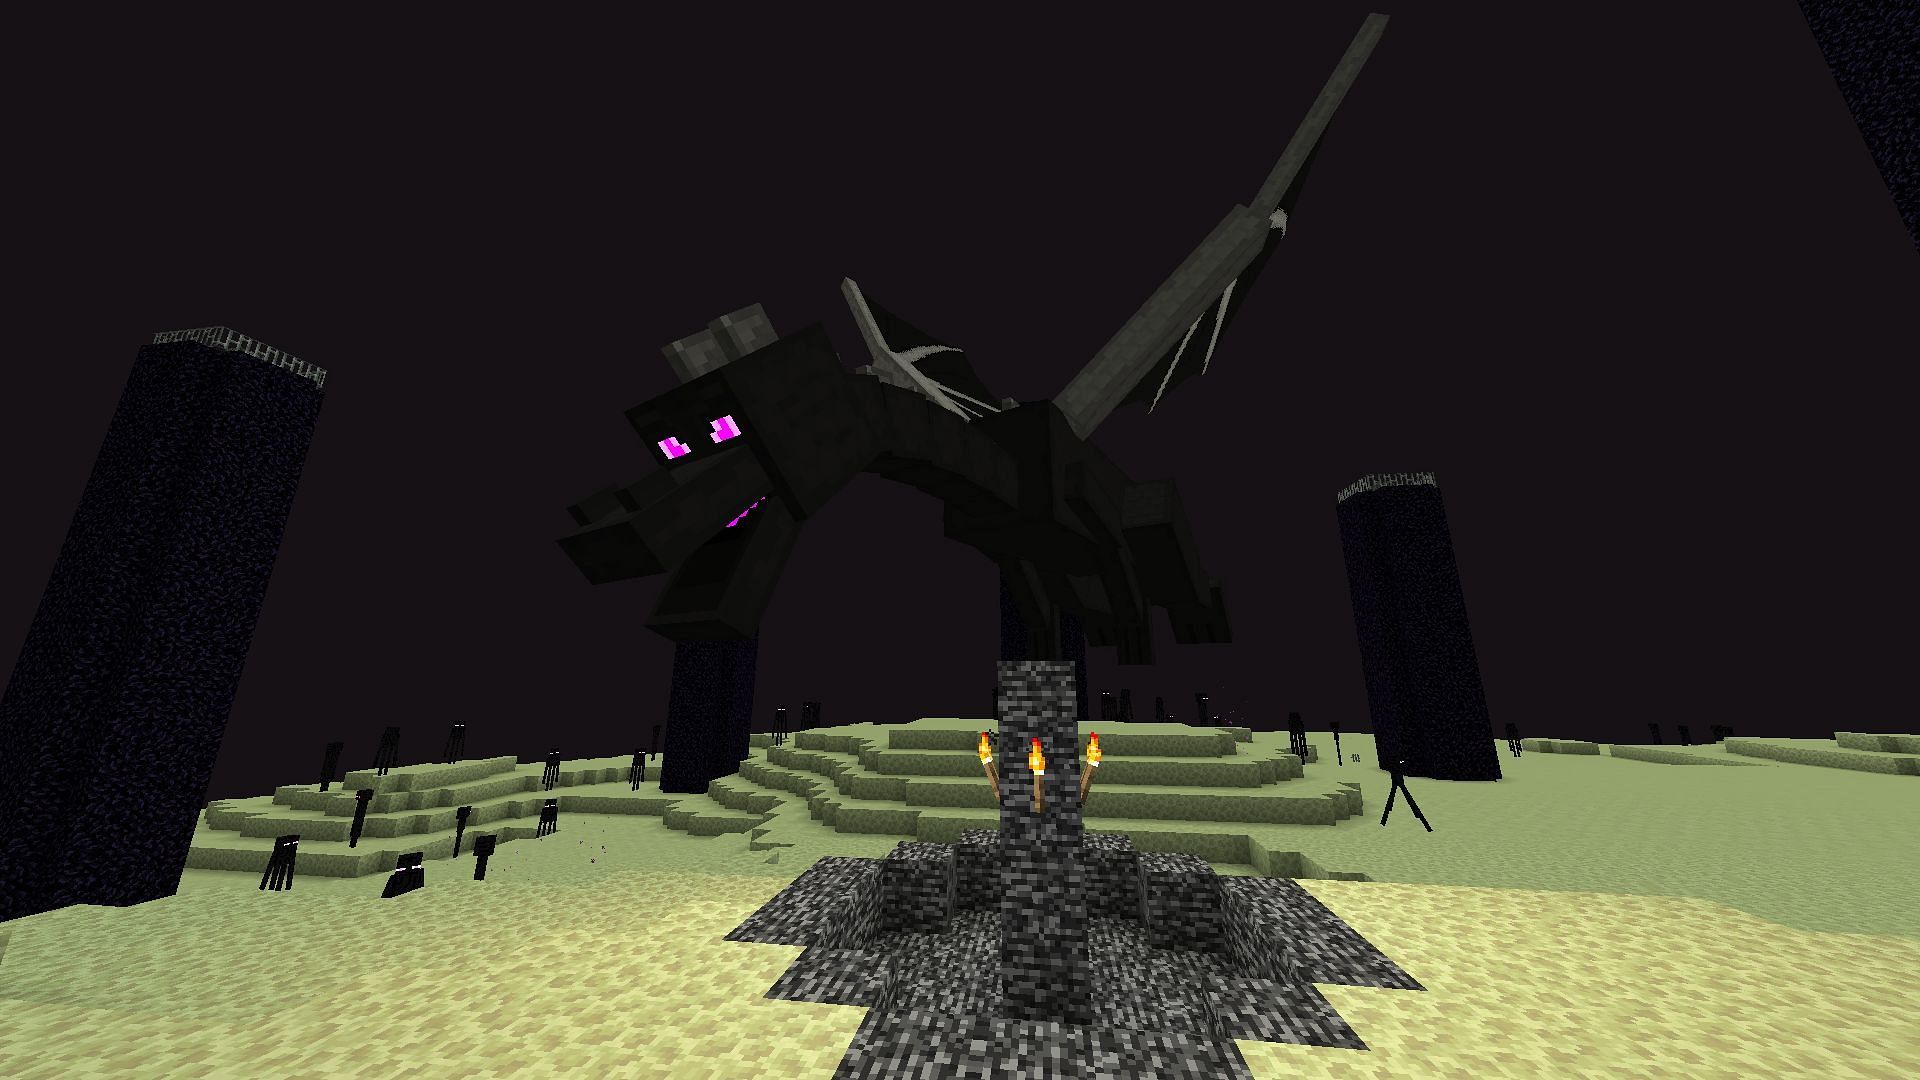 Players will instantly start the fight against Ender Dragon after entering the End realm in Minecraft (Image via Mojang)